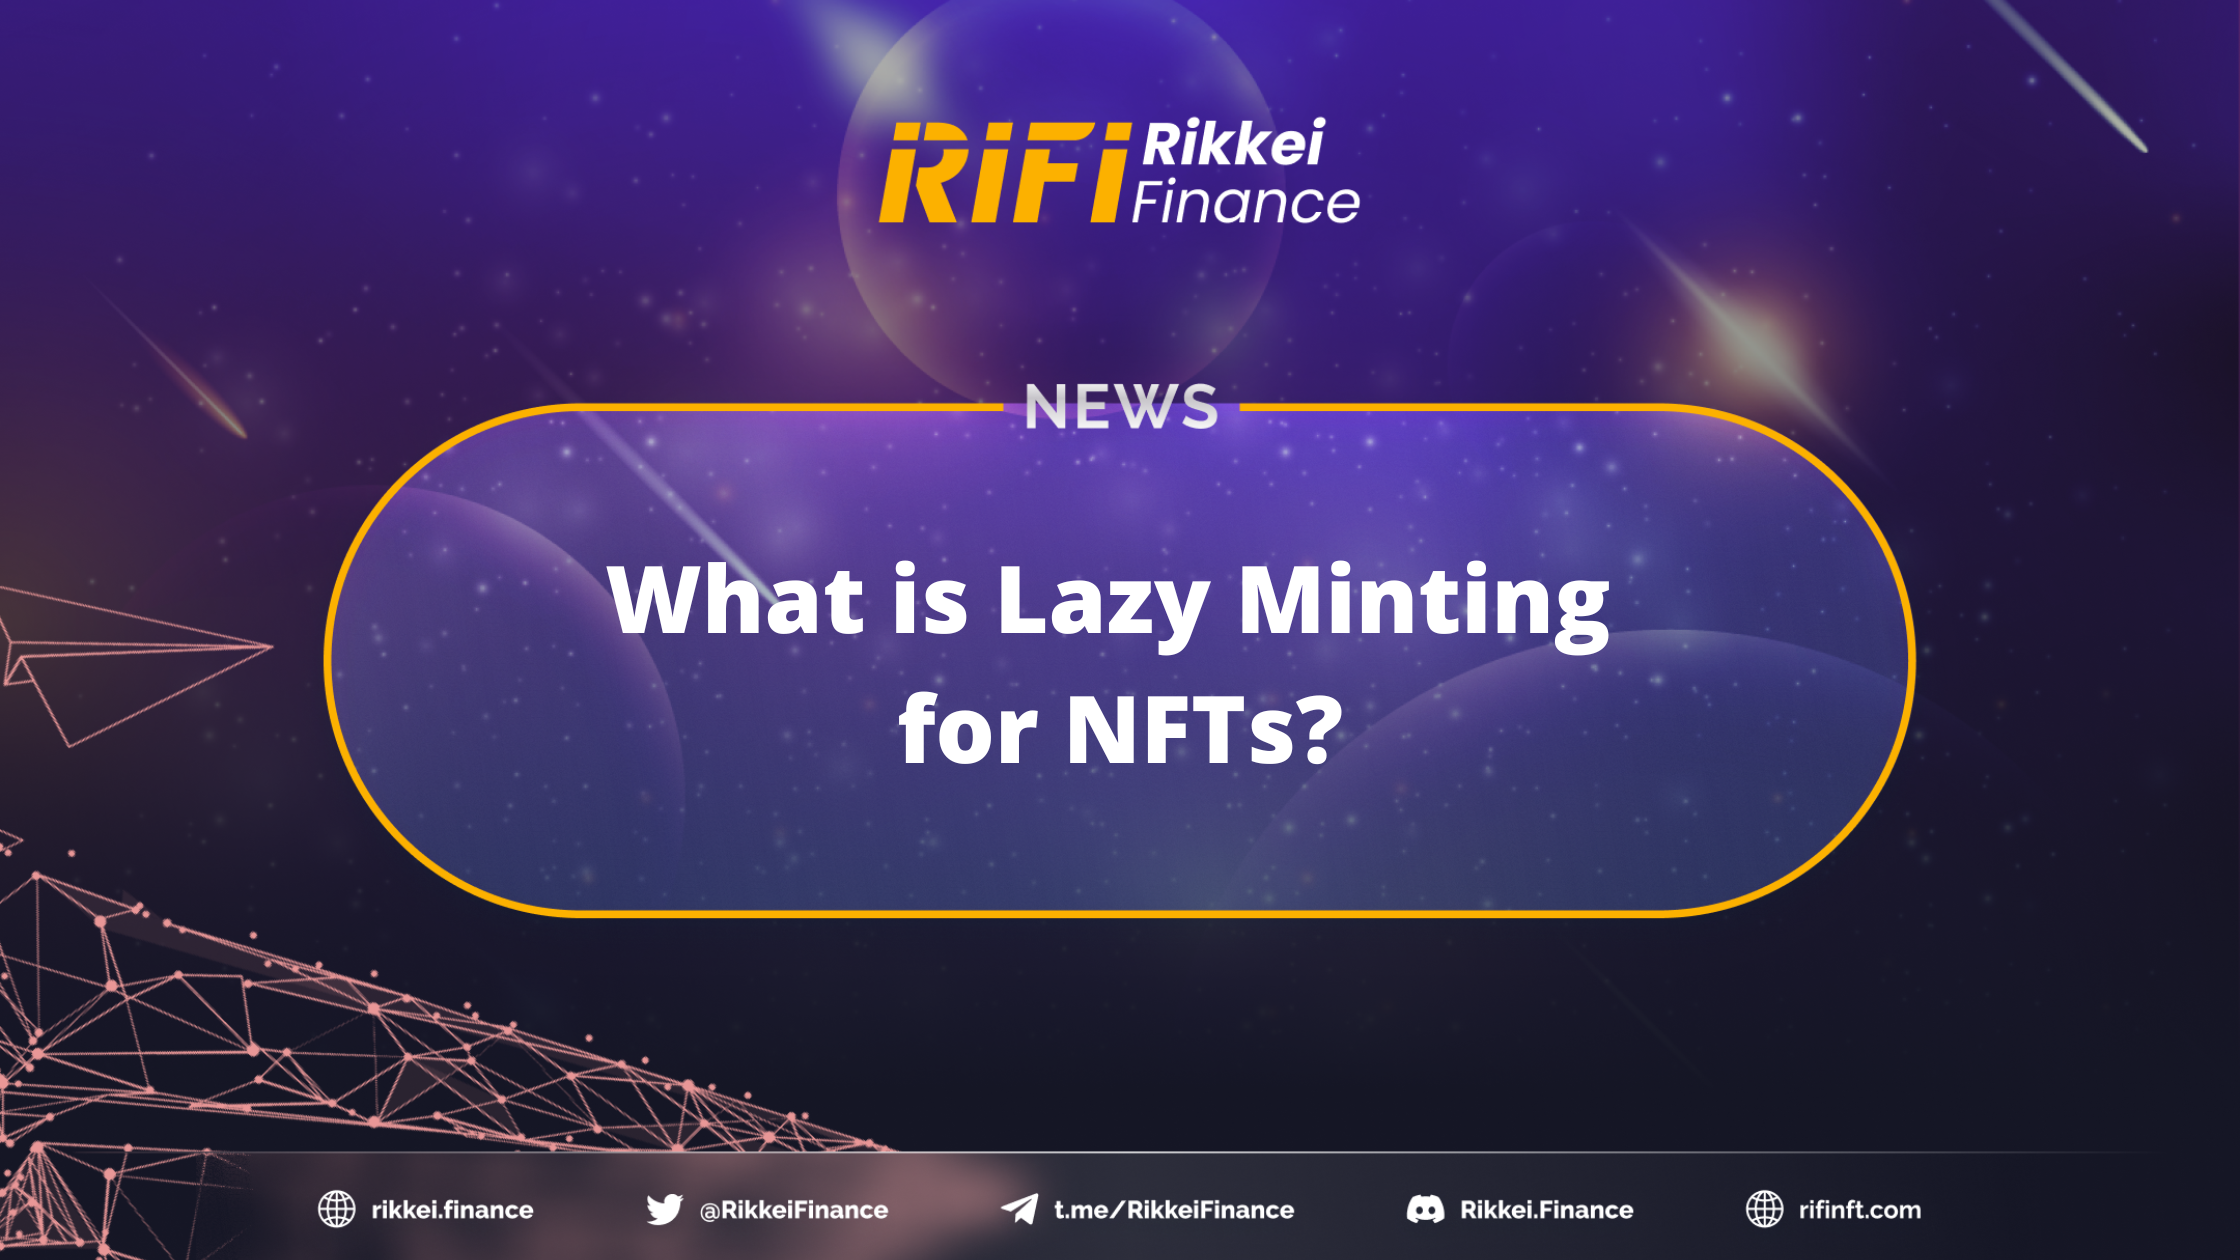 What is Lazy Minting for NFTs?